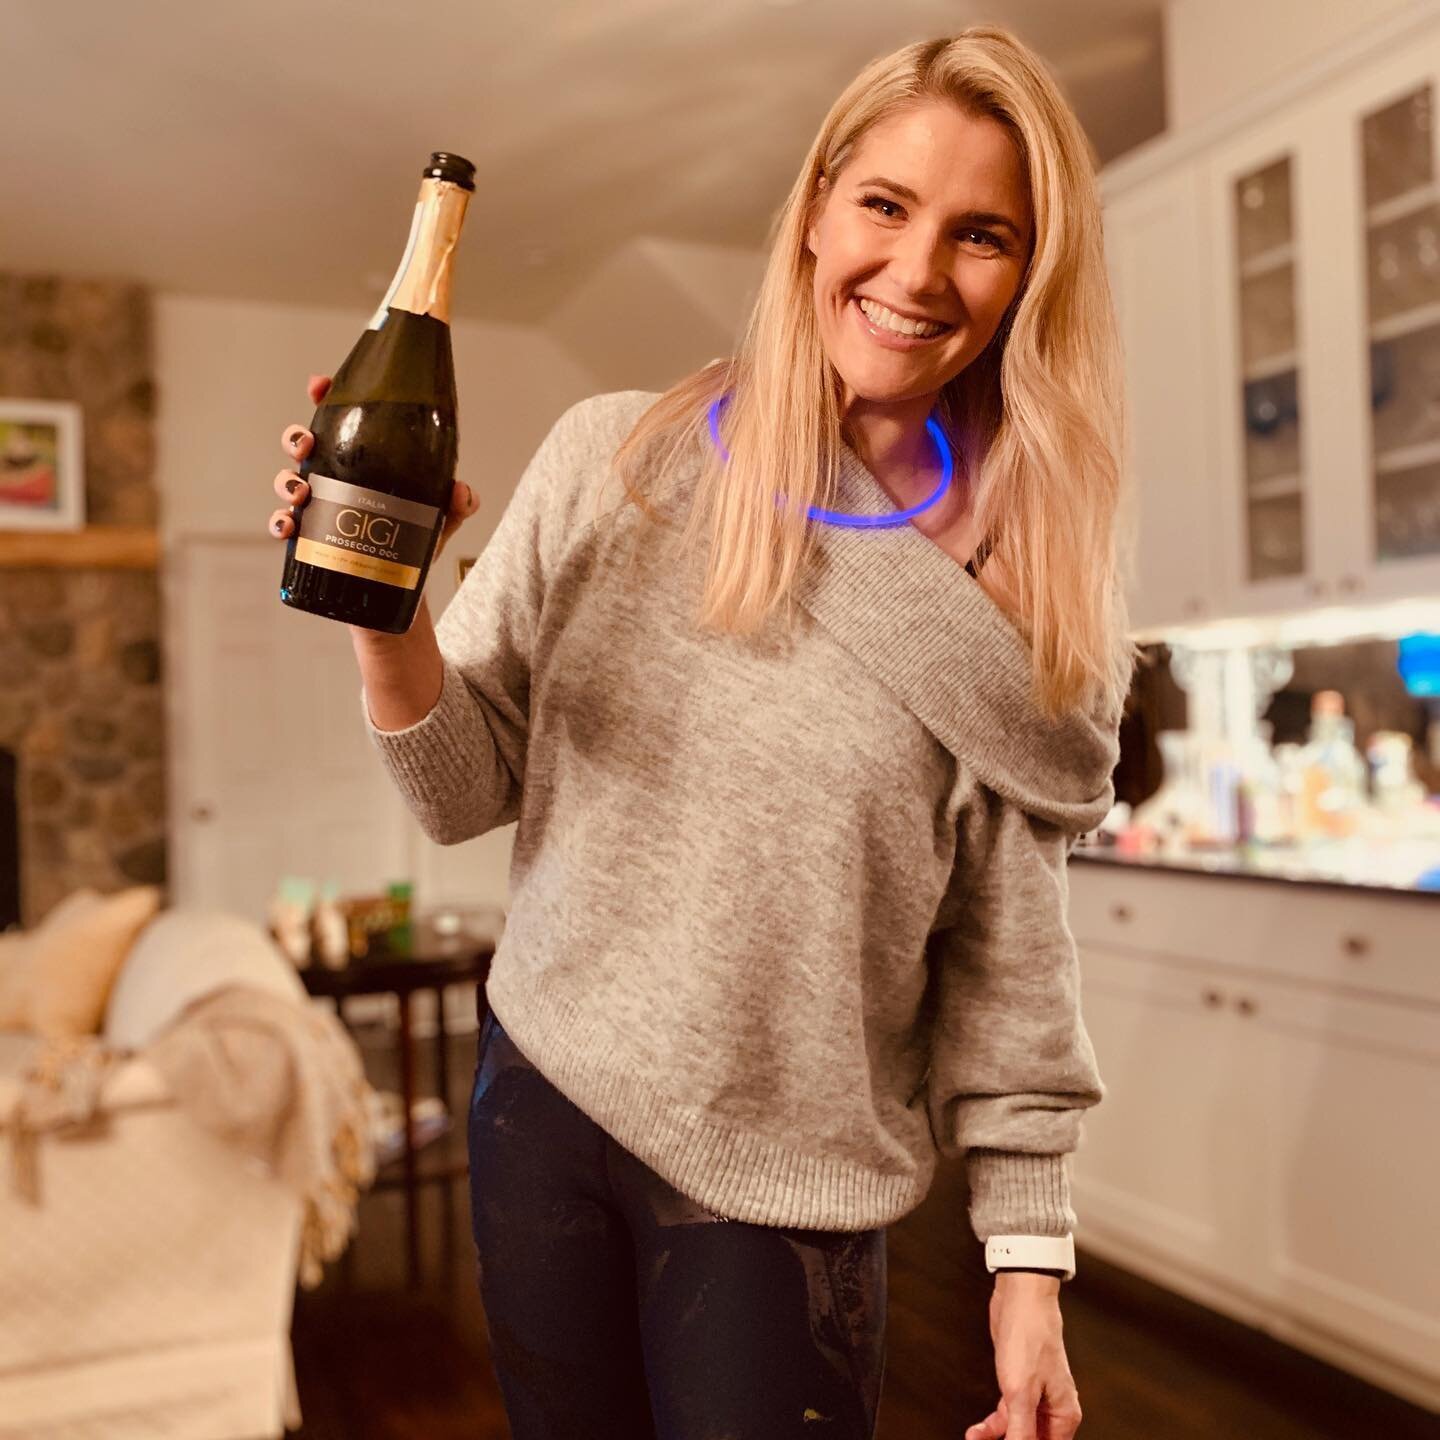 🍾to 2021 annnd if any organic &ldquo;clean&rdquo; wines want to sponsor me this year I&rsquo;m your girl.😉😉😉Seriously though this organic Prosecco from @traderjoes was great. Cheers!🥂

#happynewyear #cleanwine #prosecco #ros&eacute; #willworkout